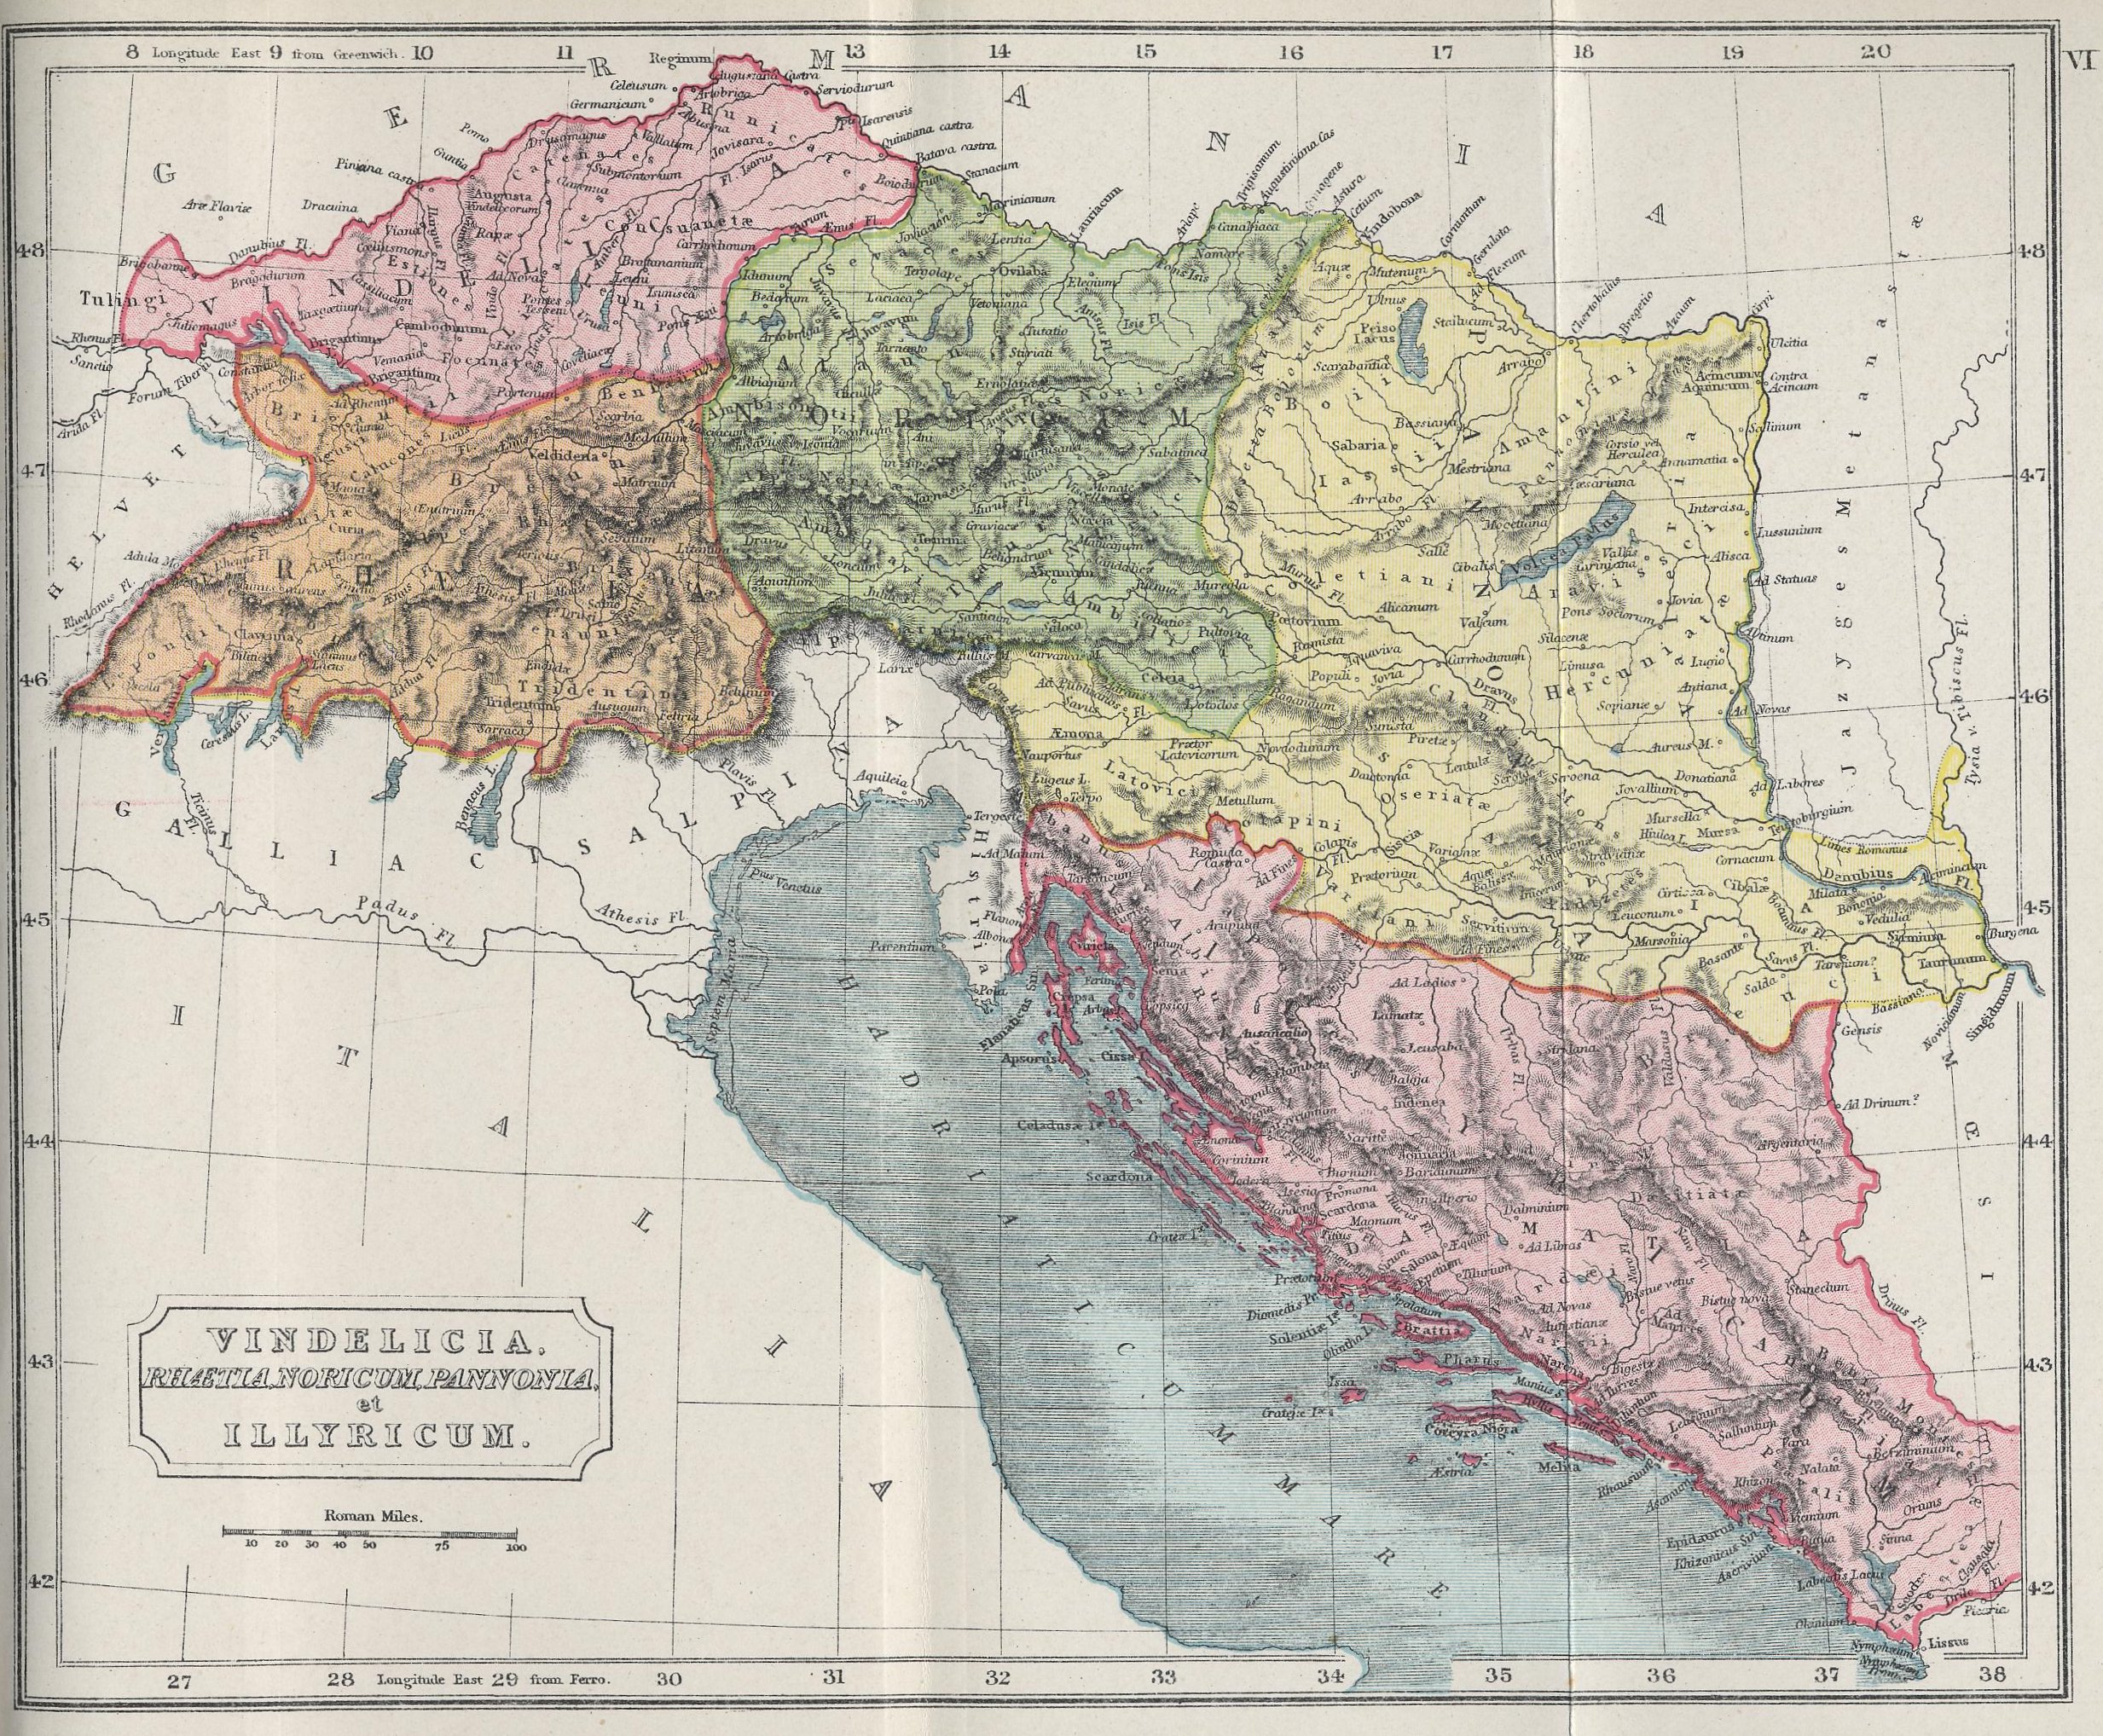 Map of Alpine Region and Western Balkans 70 BC - AD 180